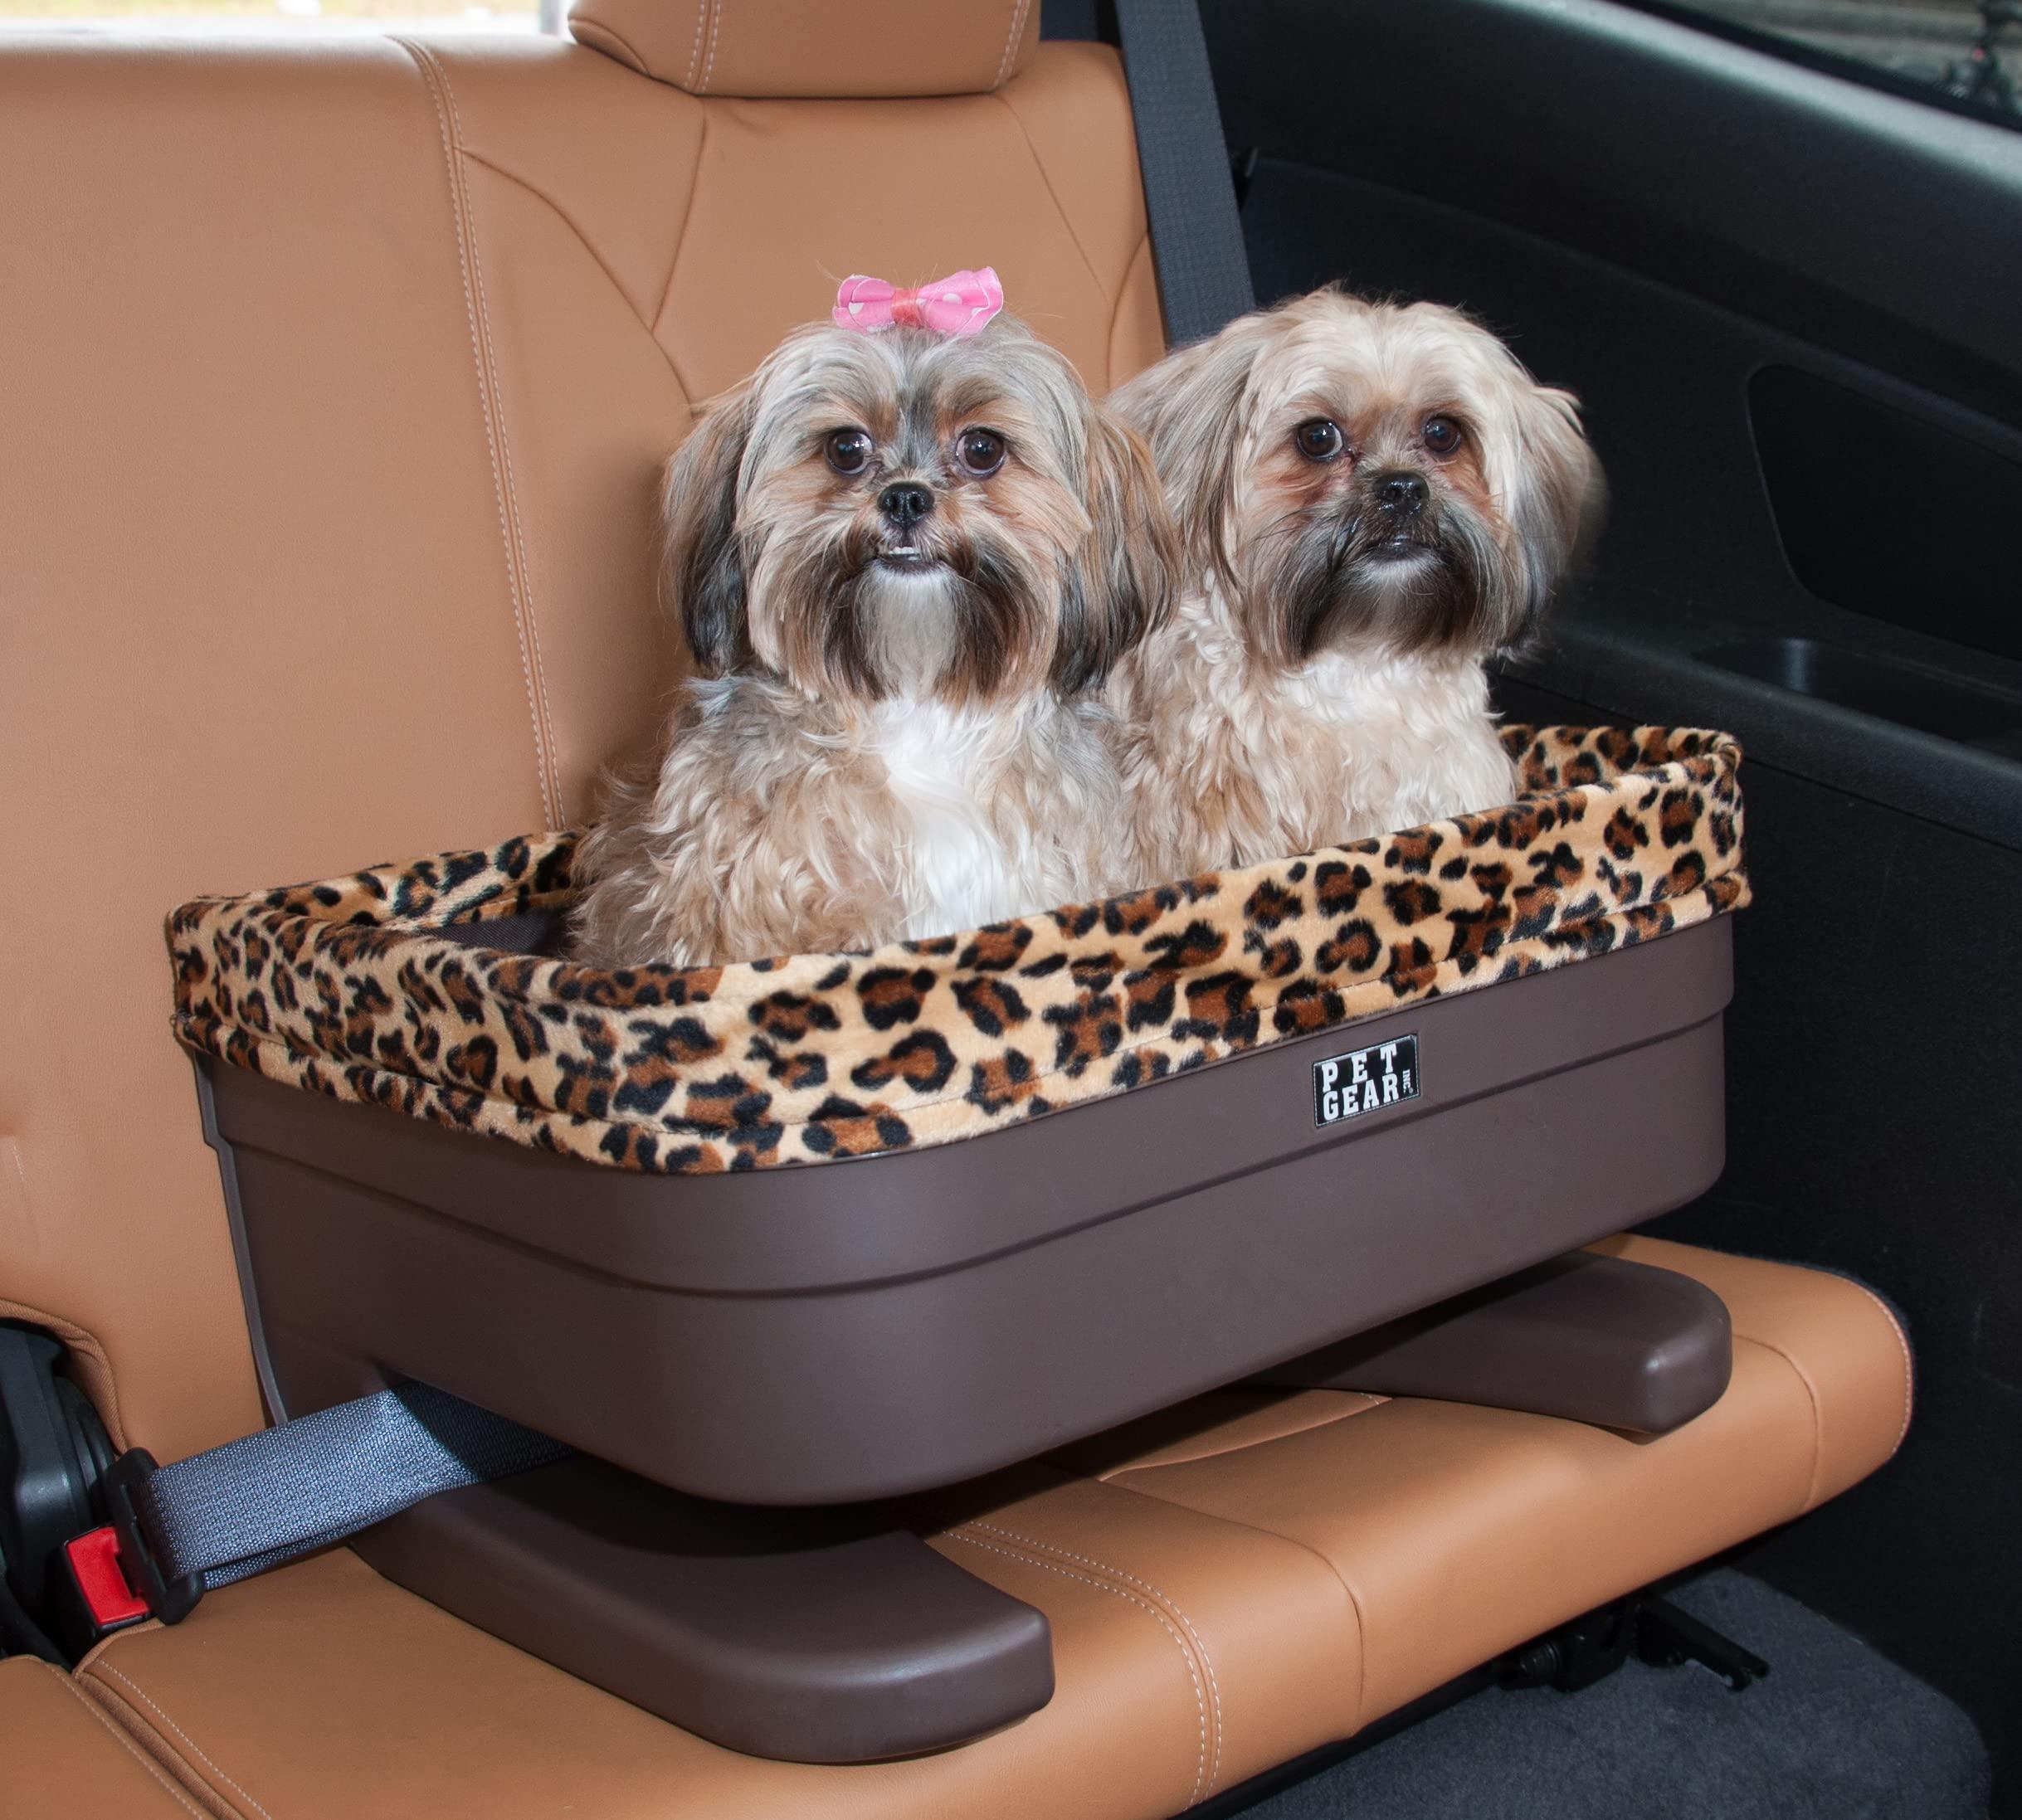 Pet Gear Booster Seat for Dogs/Cats, Removable Washable Comfort Pillow + Liner, Safety Tethers Included, Installs in Seconds, No Tools Required, 3 Colors